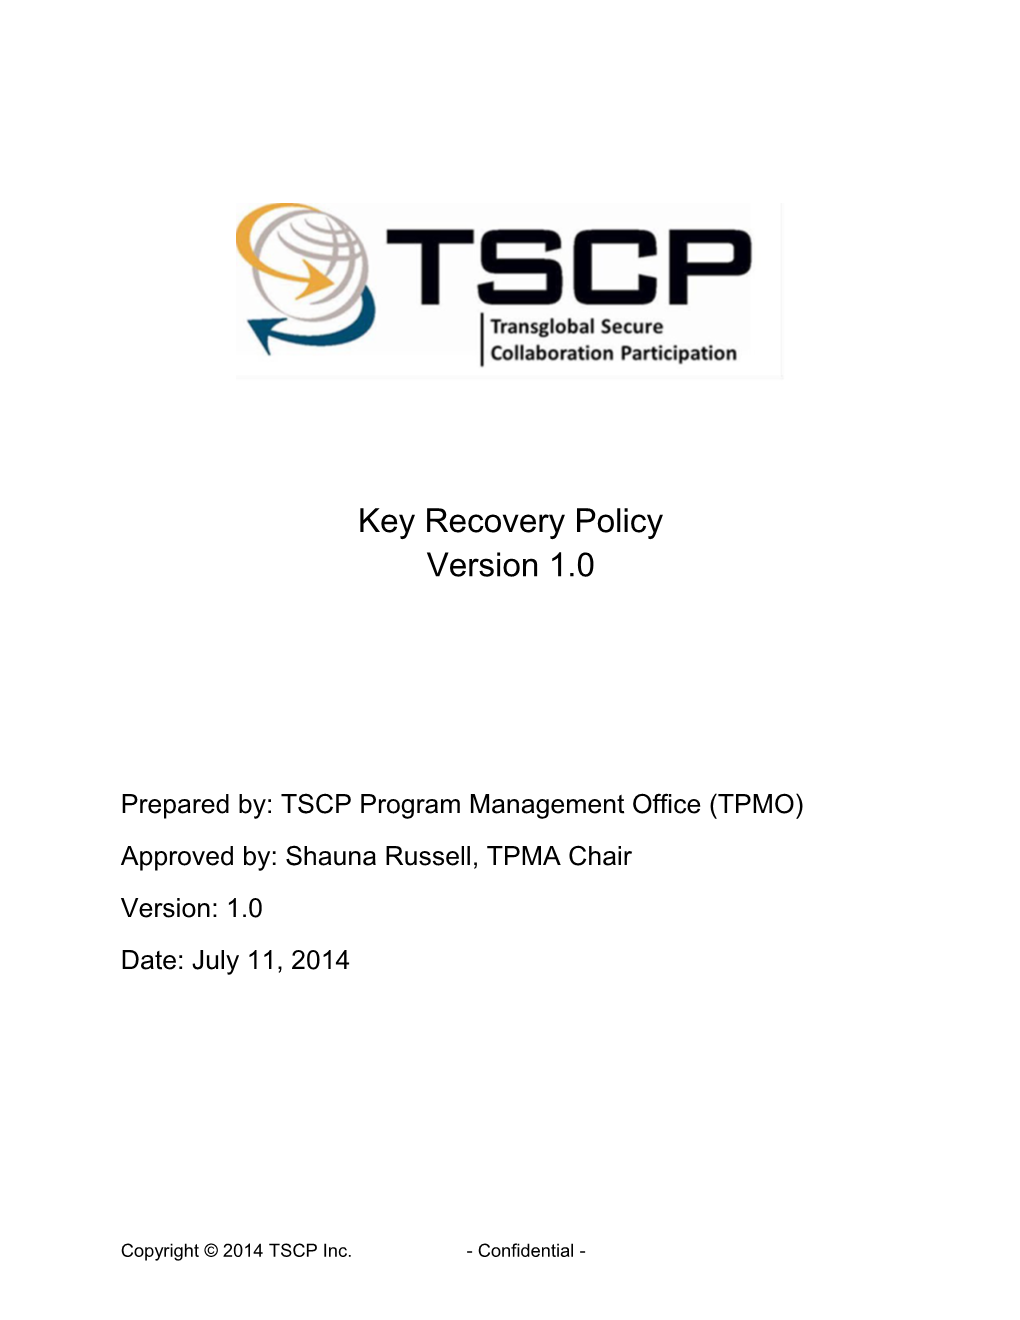 Prepared By: TSCP Program Management Office (TPMO)